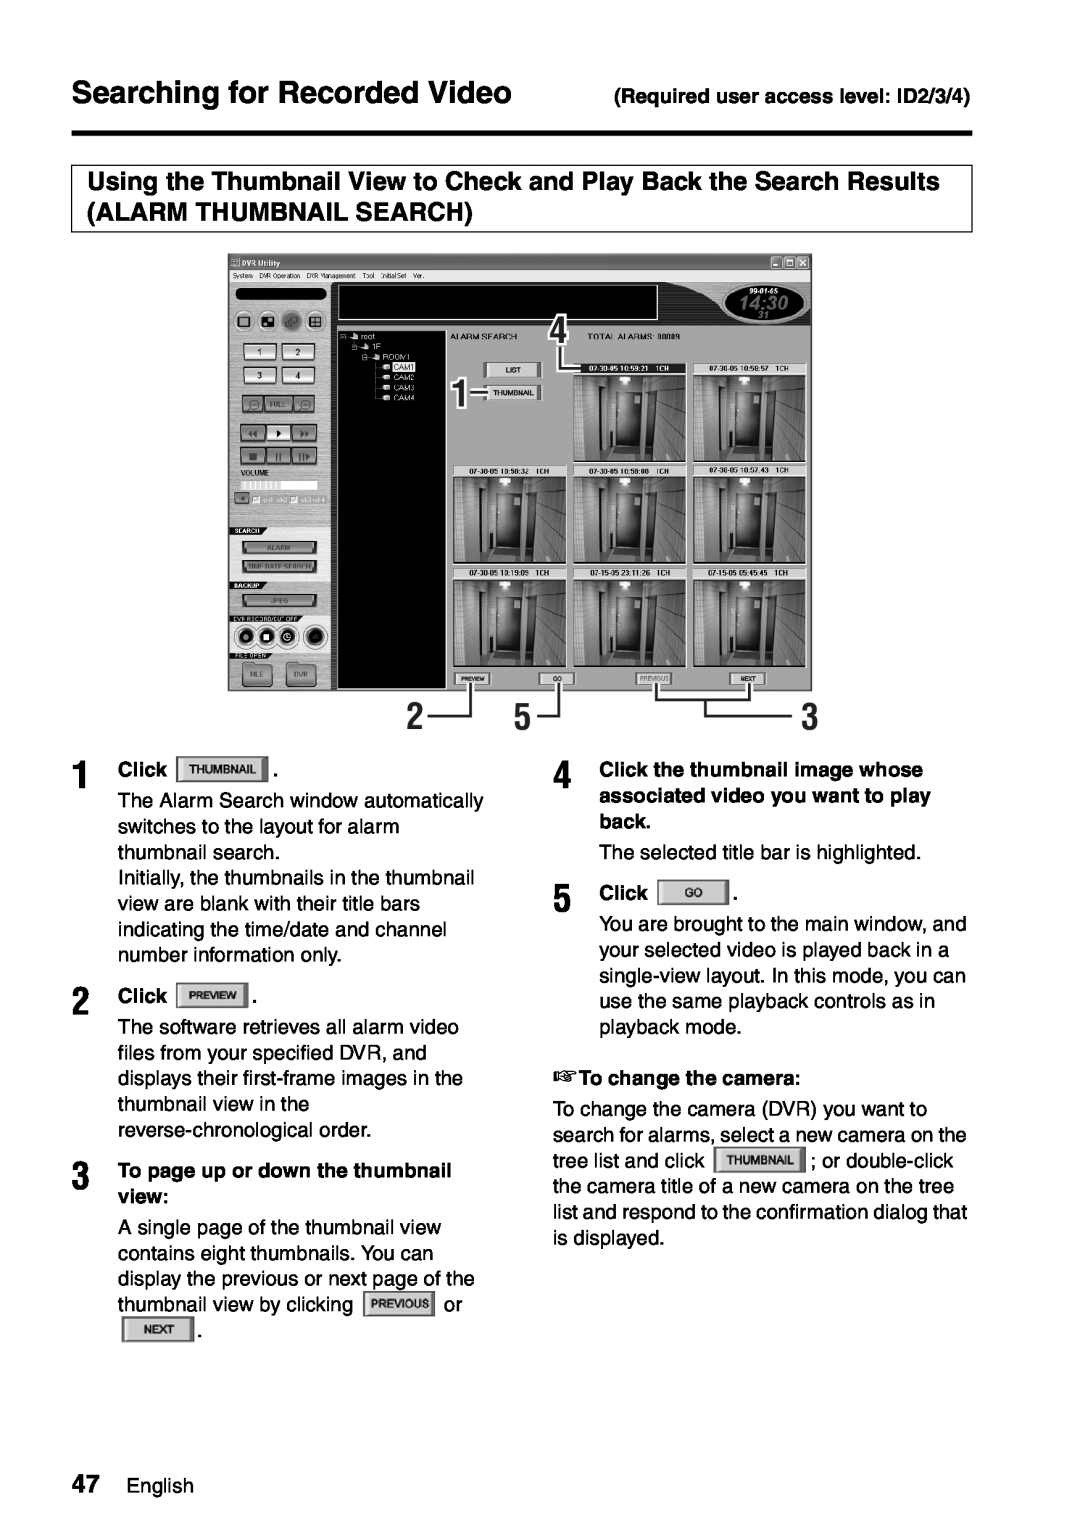 Sanyo VA-SW8000 Alarm Thumbnail Search, To page up or down the thumbnail view, back, The selected title bar is highlighted 